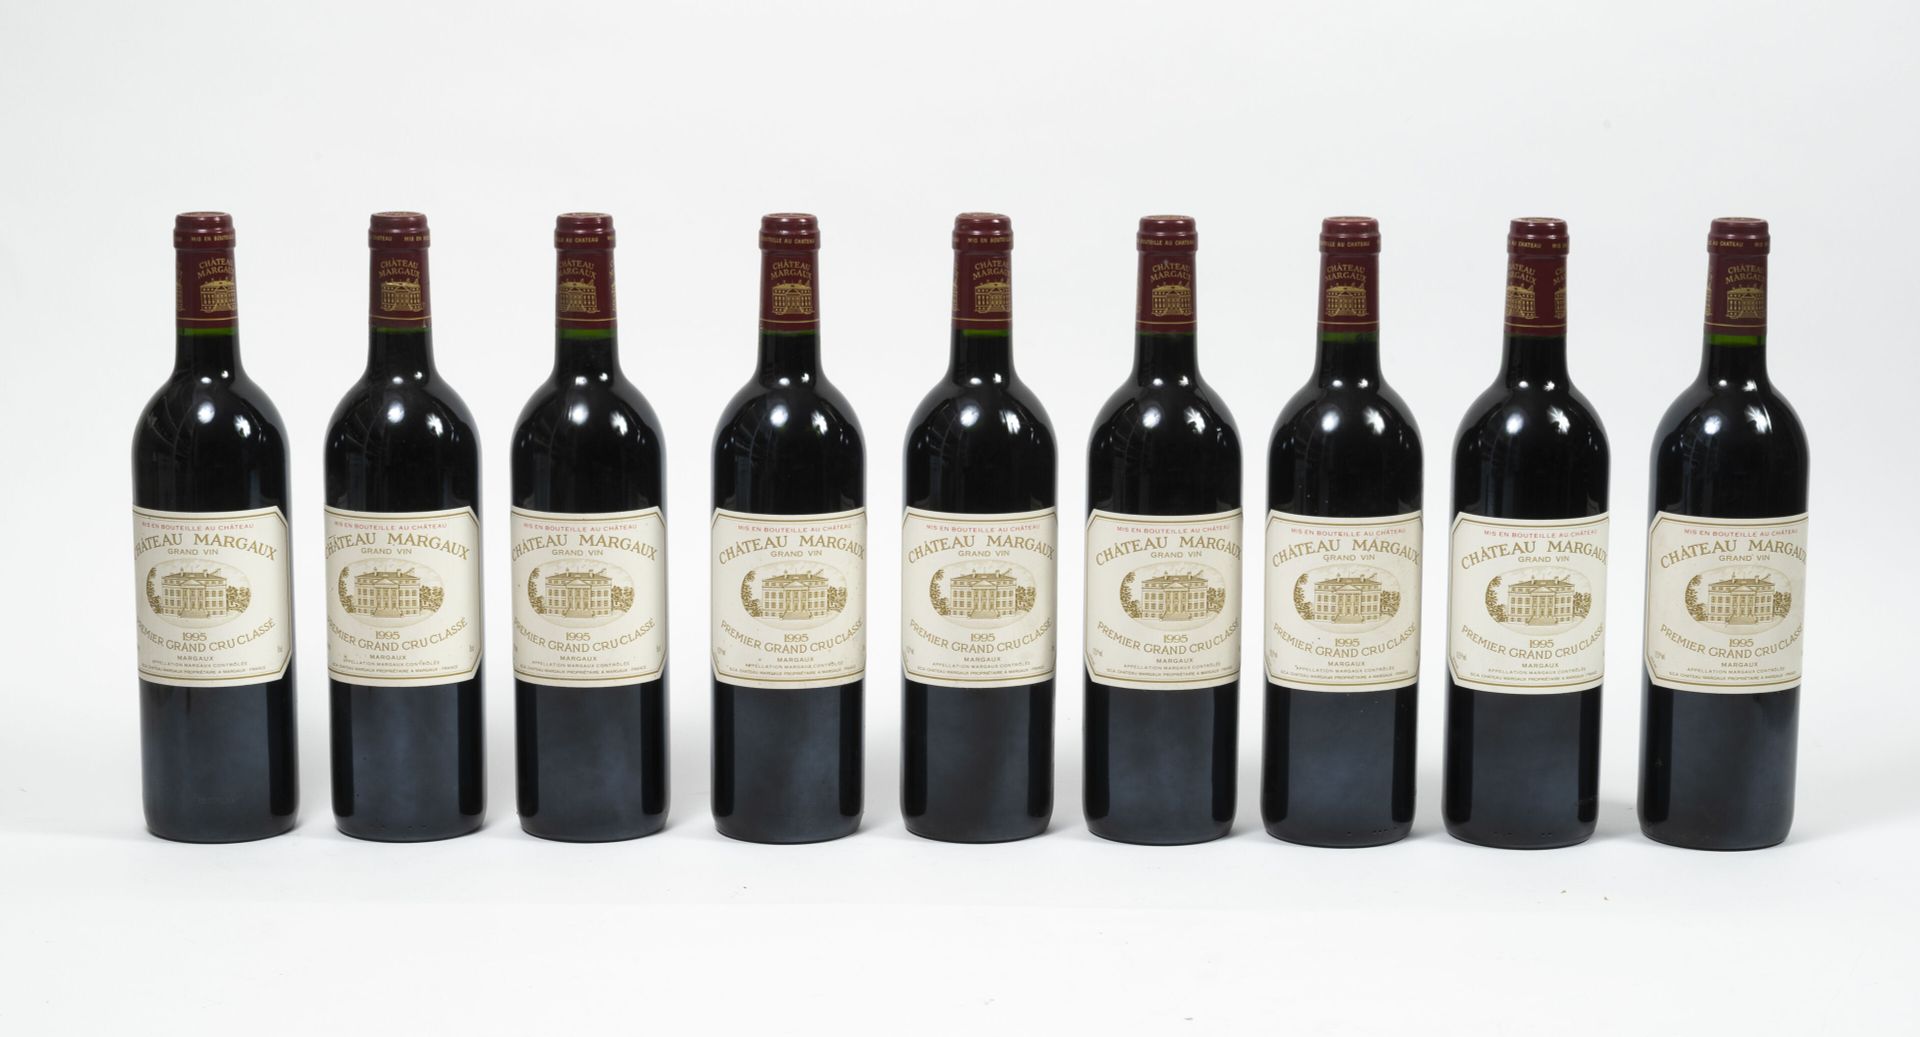 CHÂTEAU MARGAUX Lot of 9 bottles, 1995.

Good condition.

Small stains on some l&hellip;